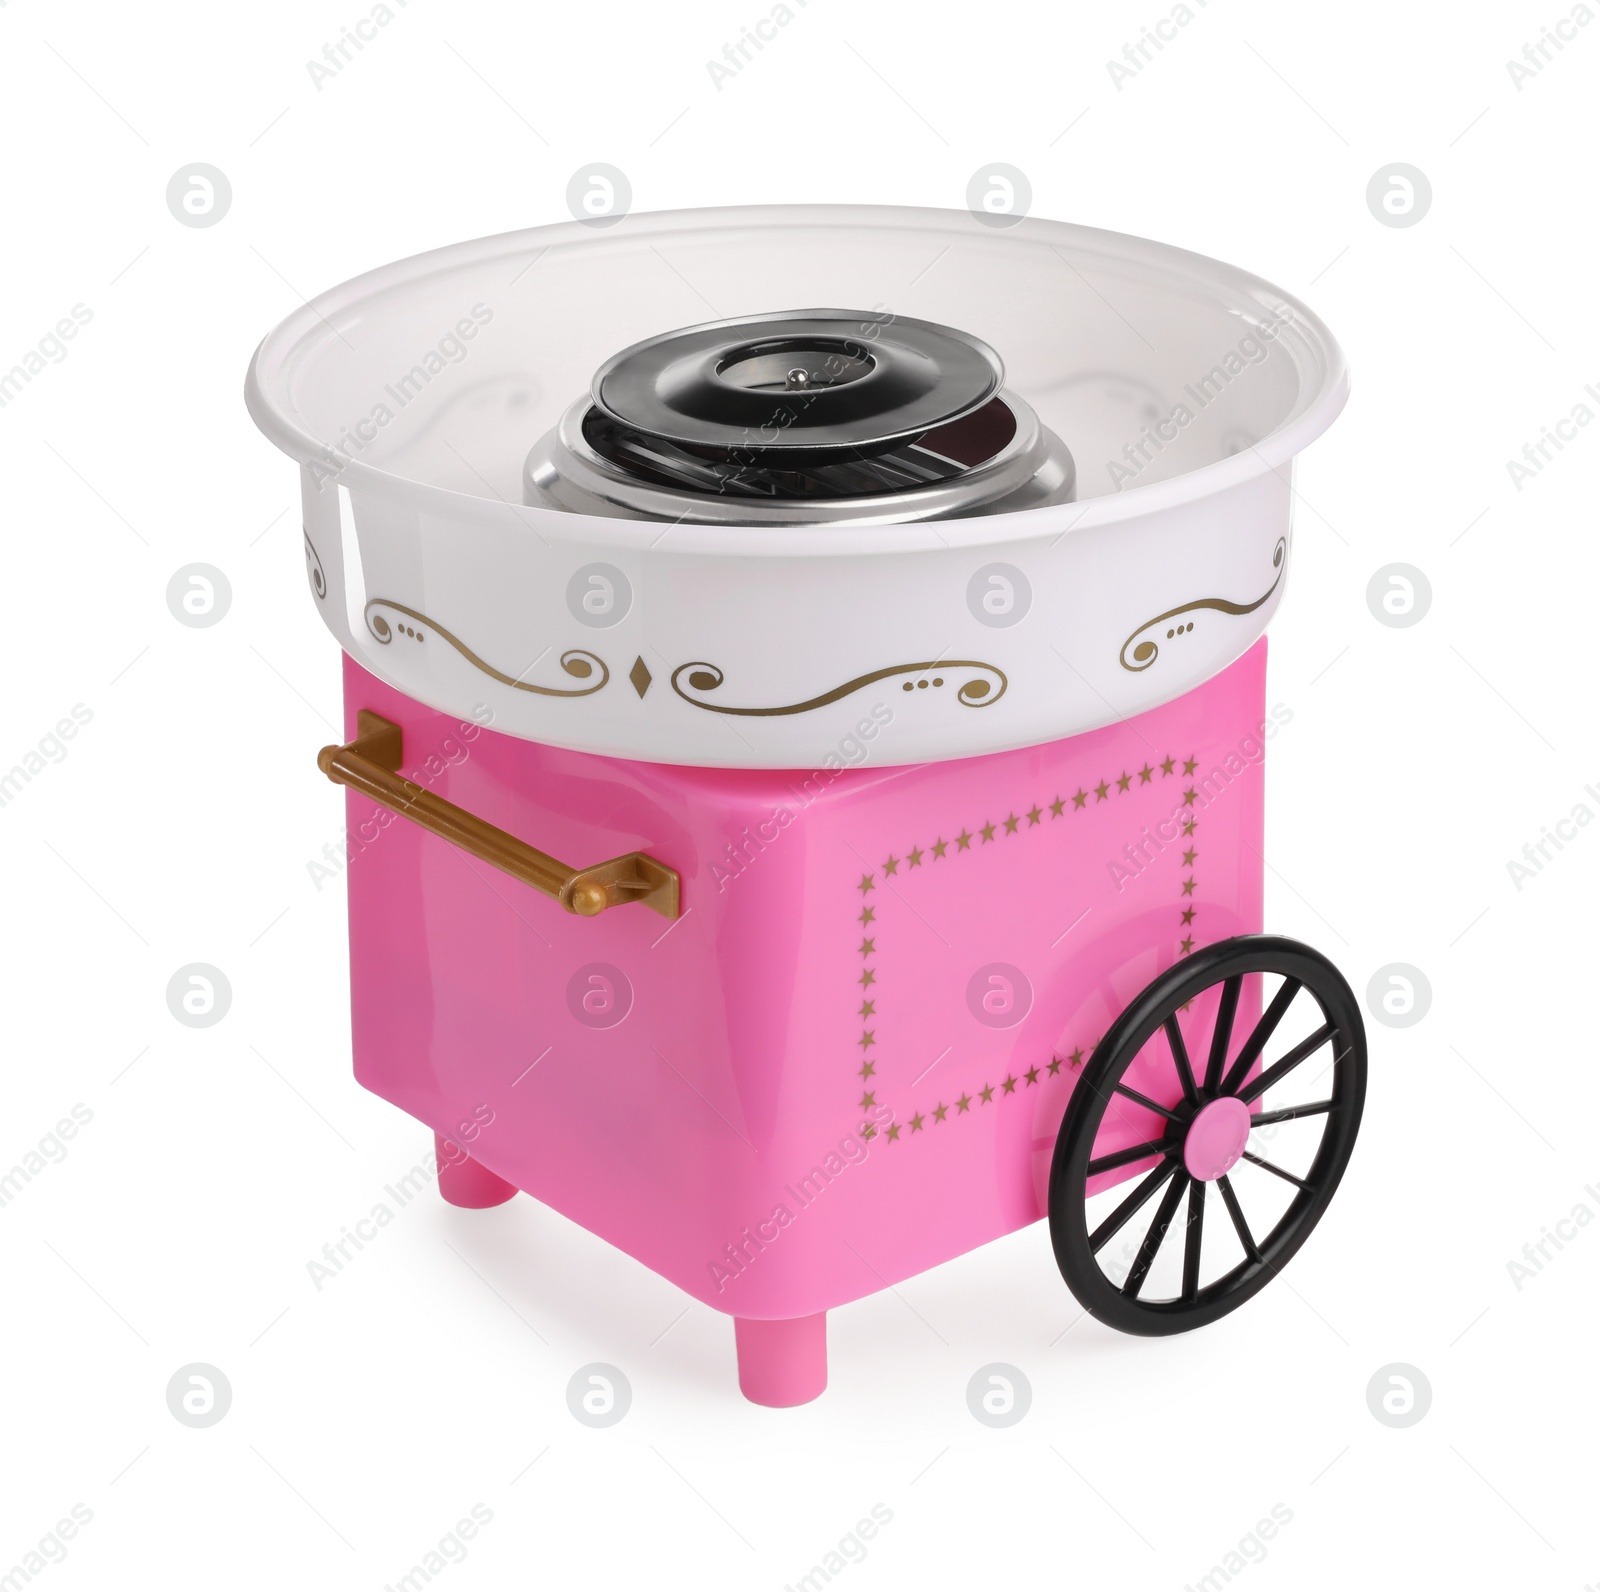 Photo of Portable candy cotton machine isolated on white